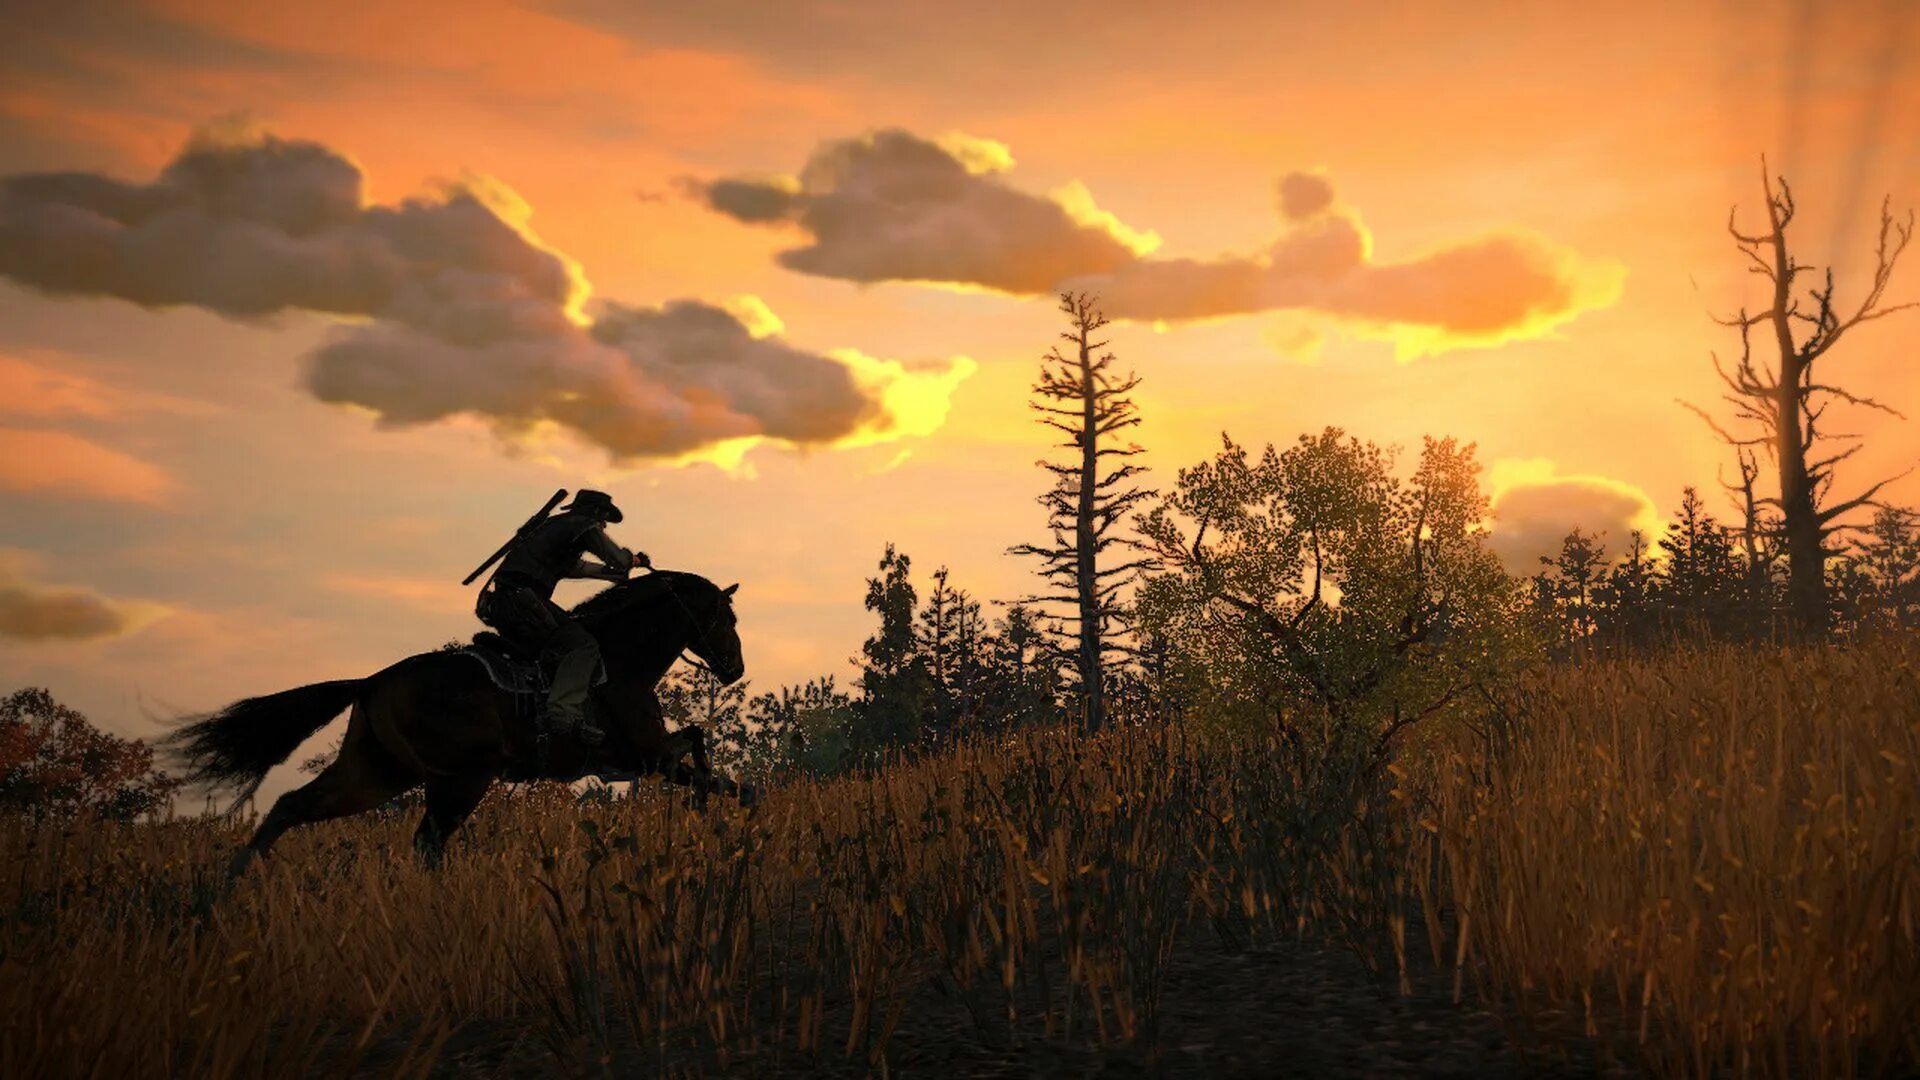 Red dead redemption series. Rdr 2 Xbox 360. Red Dead Redemption 1. Red Dead Redemption 2010. Red Dead Redemption 2 Sunset.